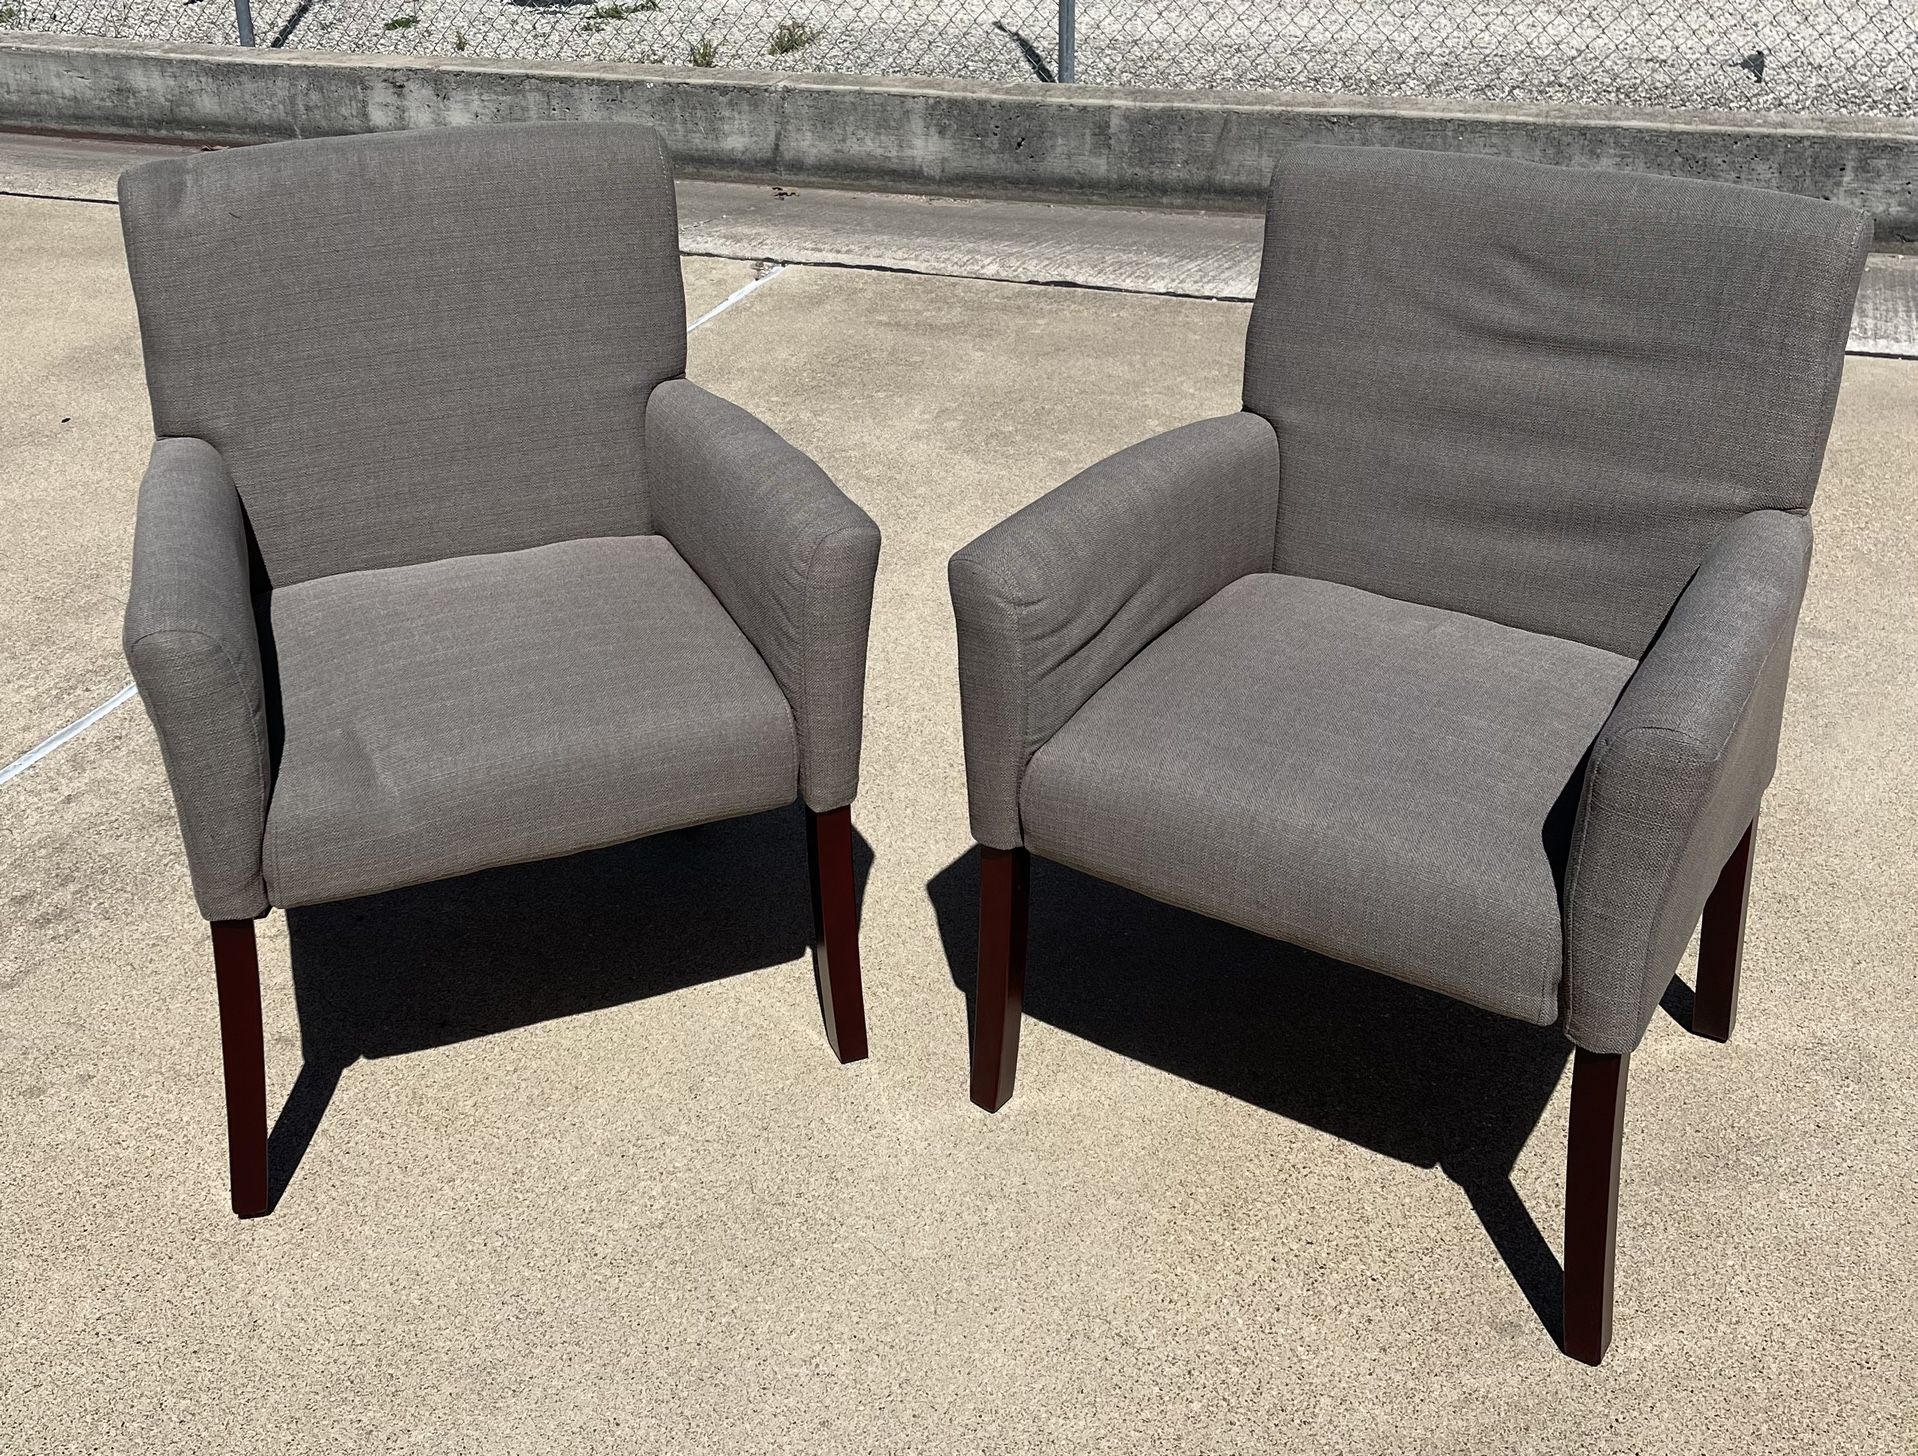 Armed Guest Chair - 2 Available (1-$20/2-$35) 